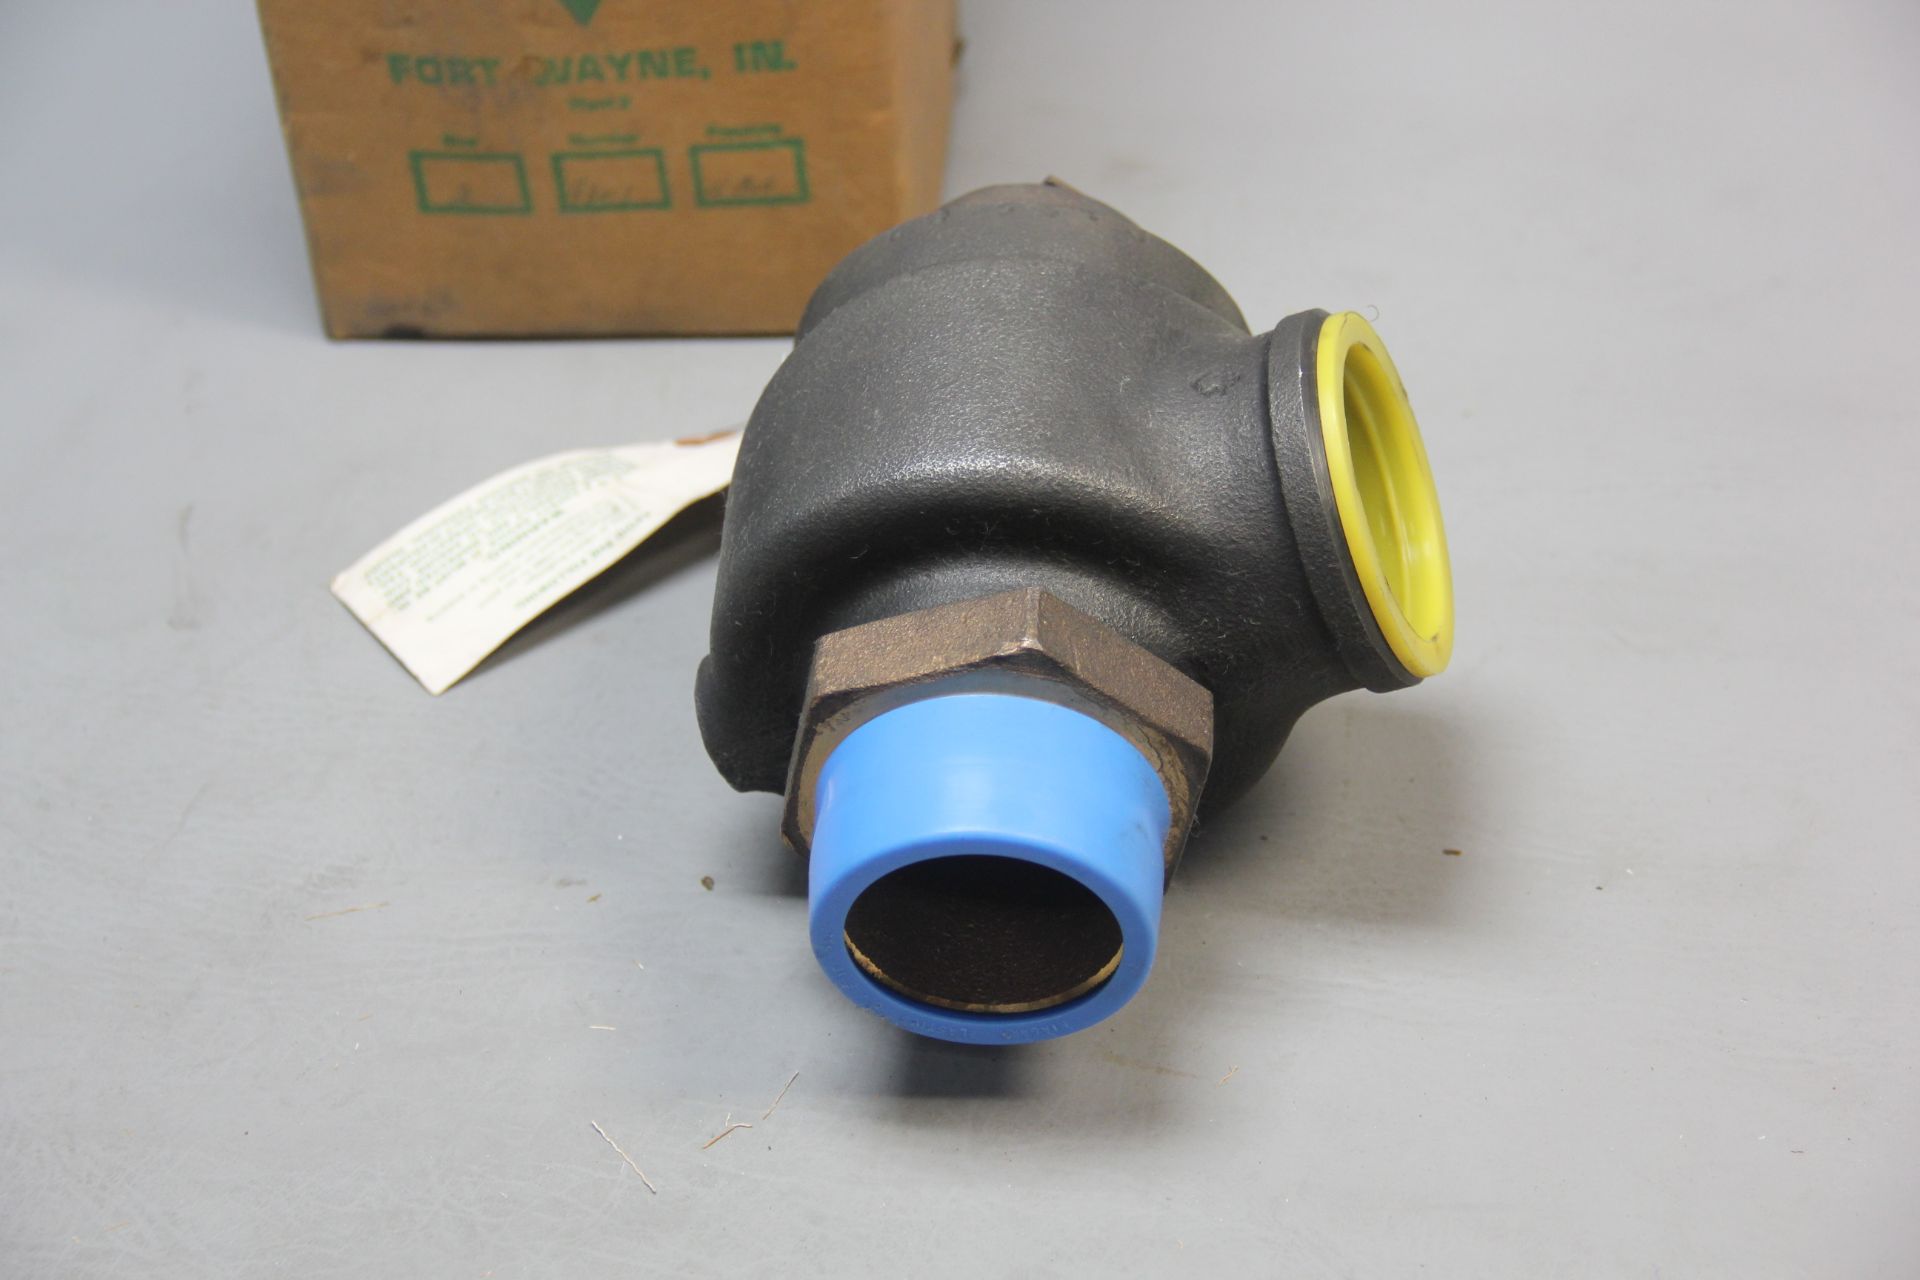 NEW KUNKLE 2" SAFETY RELIEF VALVE - Image 4 of 5